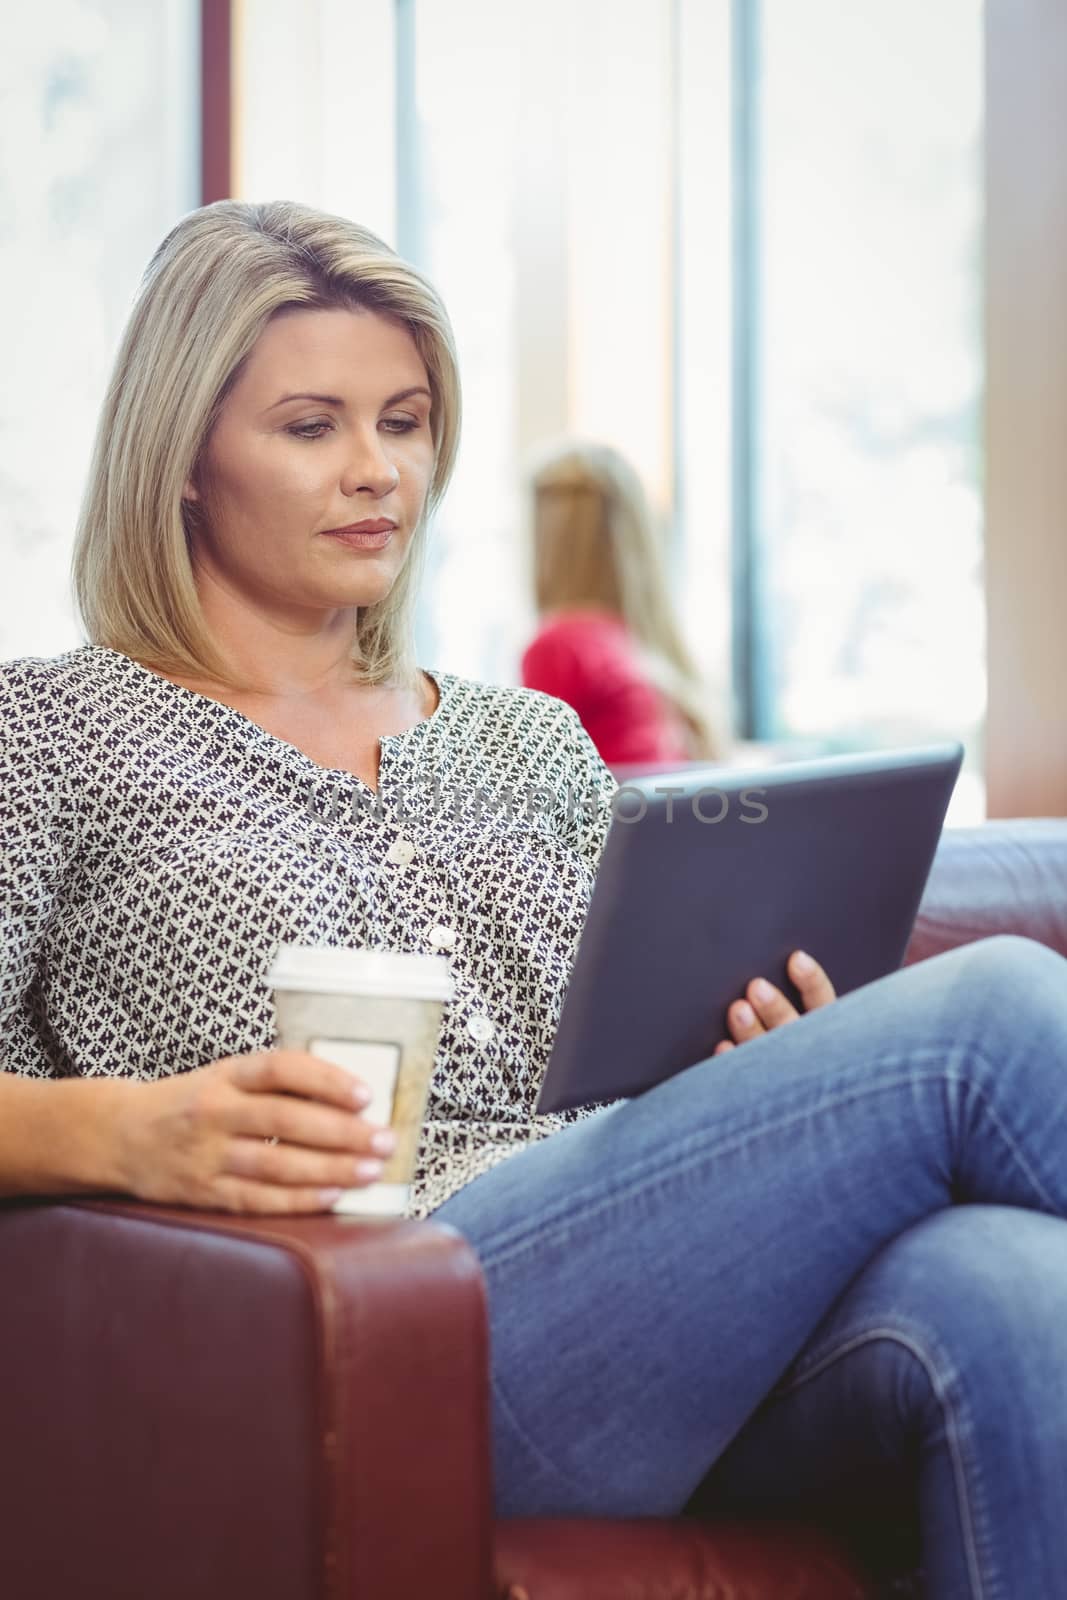 Woman using digital tablet and holding disposable cup in library